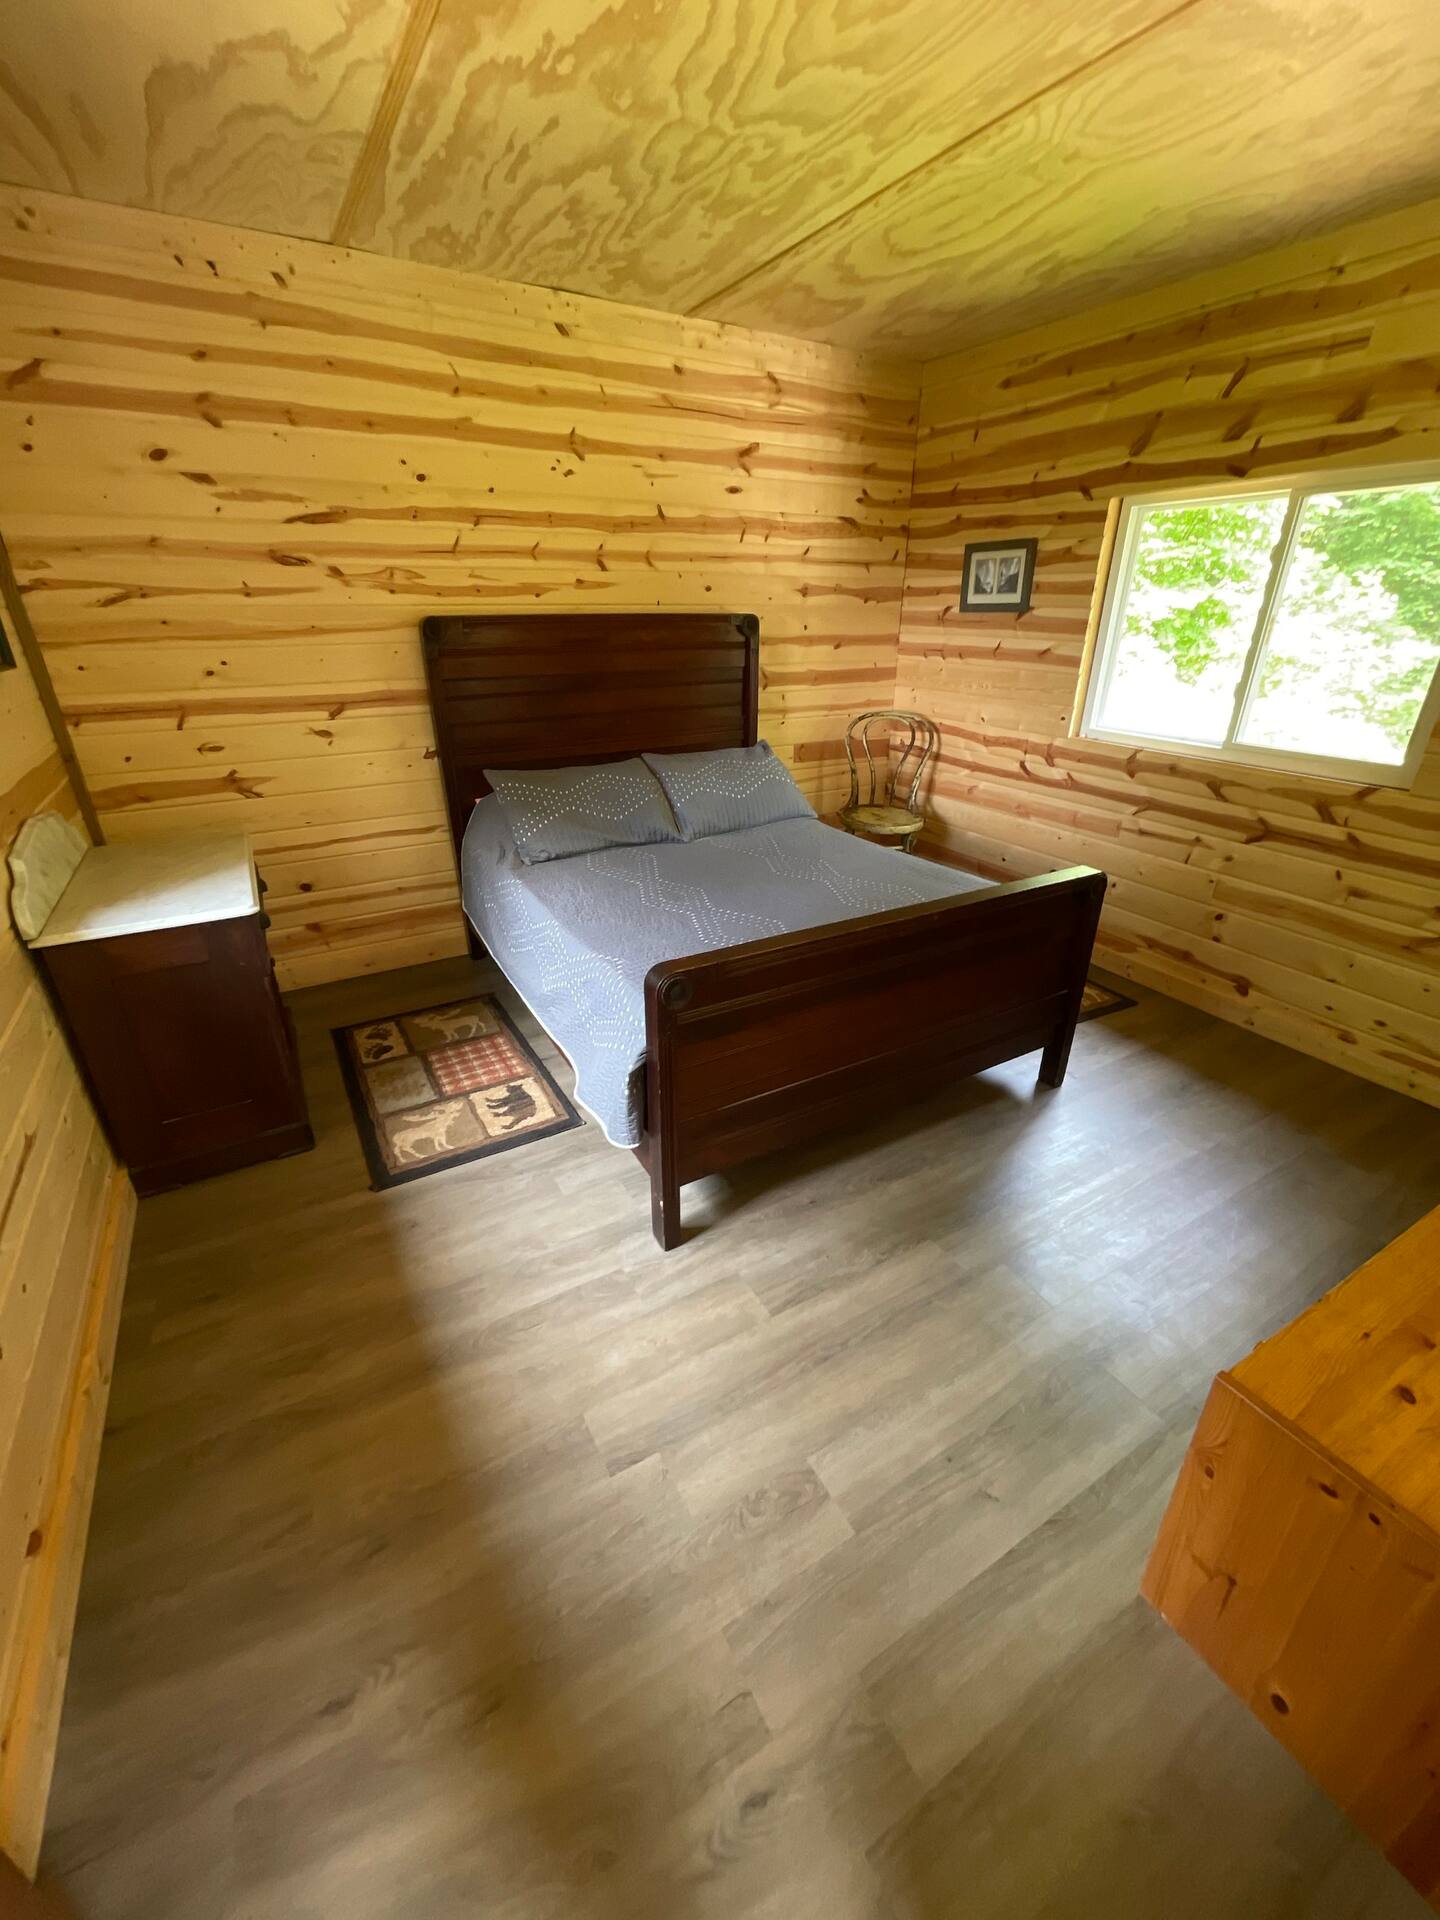 Wooden queen sized bed next to the window